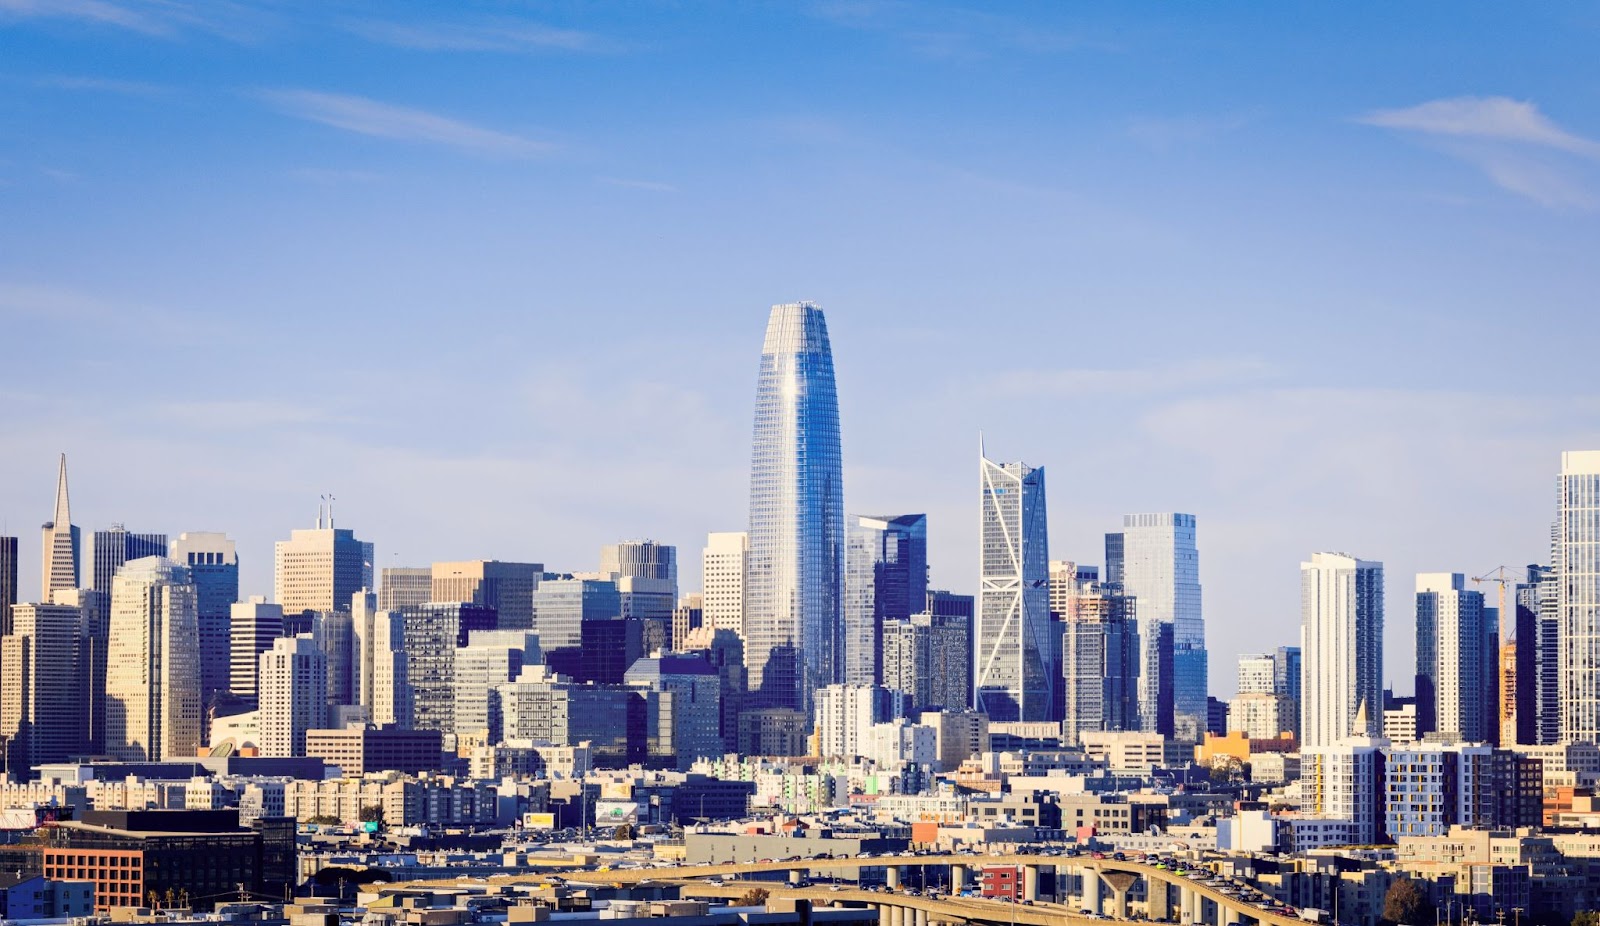 The Salesforce Tower will stand for centuries, but the employees are gone